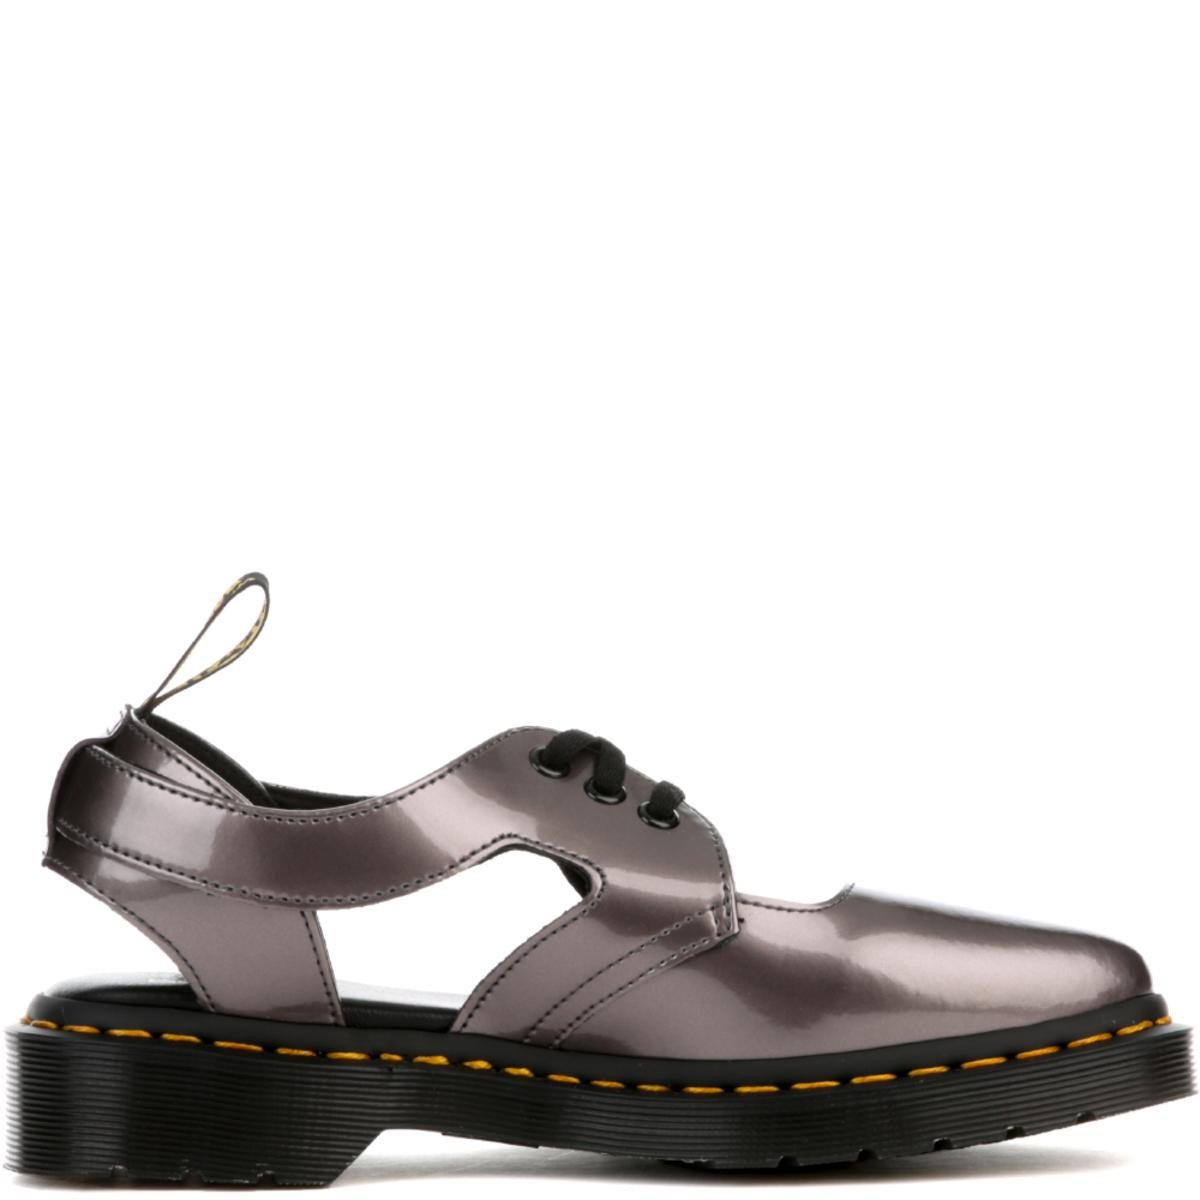 Genna Pewter Cut Out Shoe Pewter